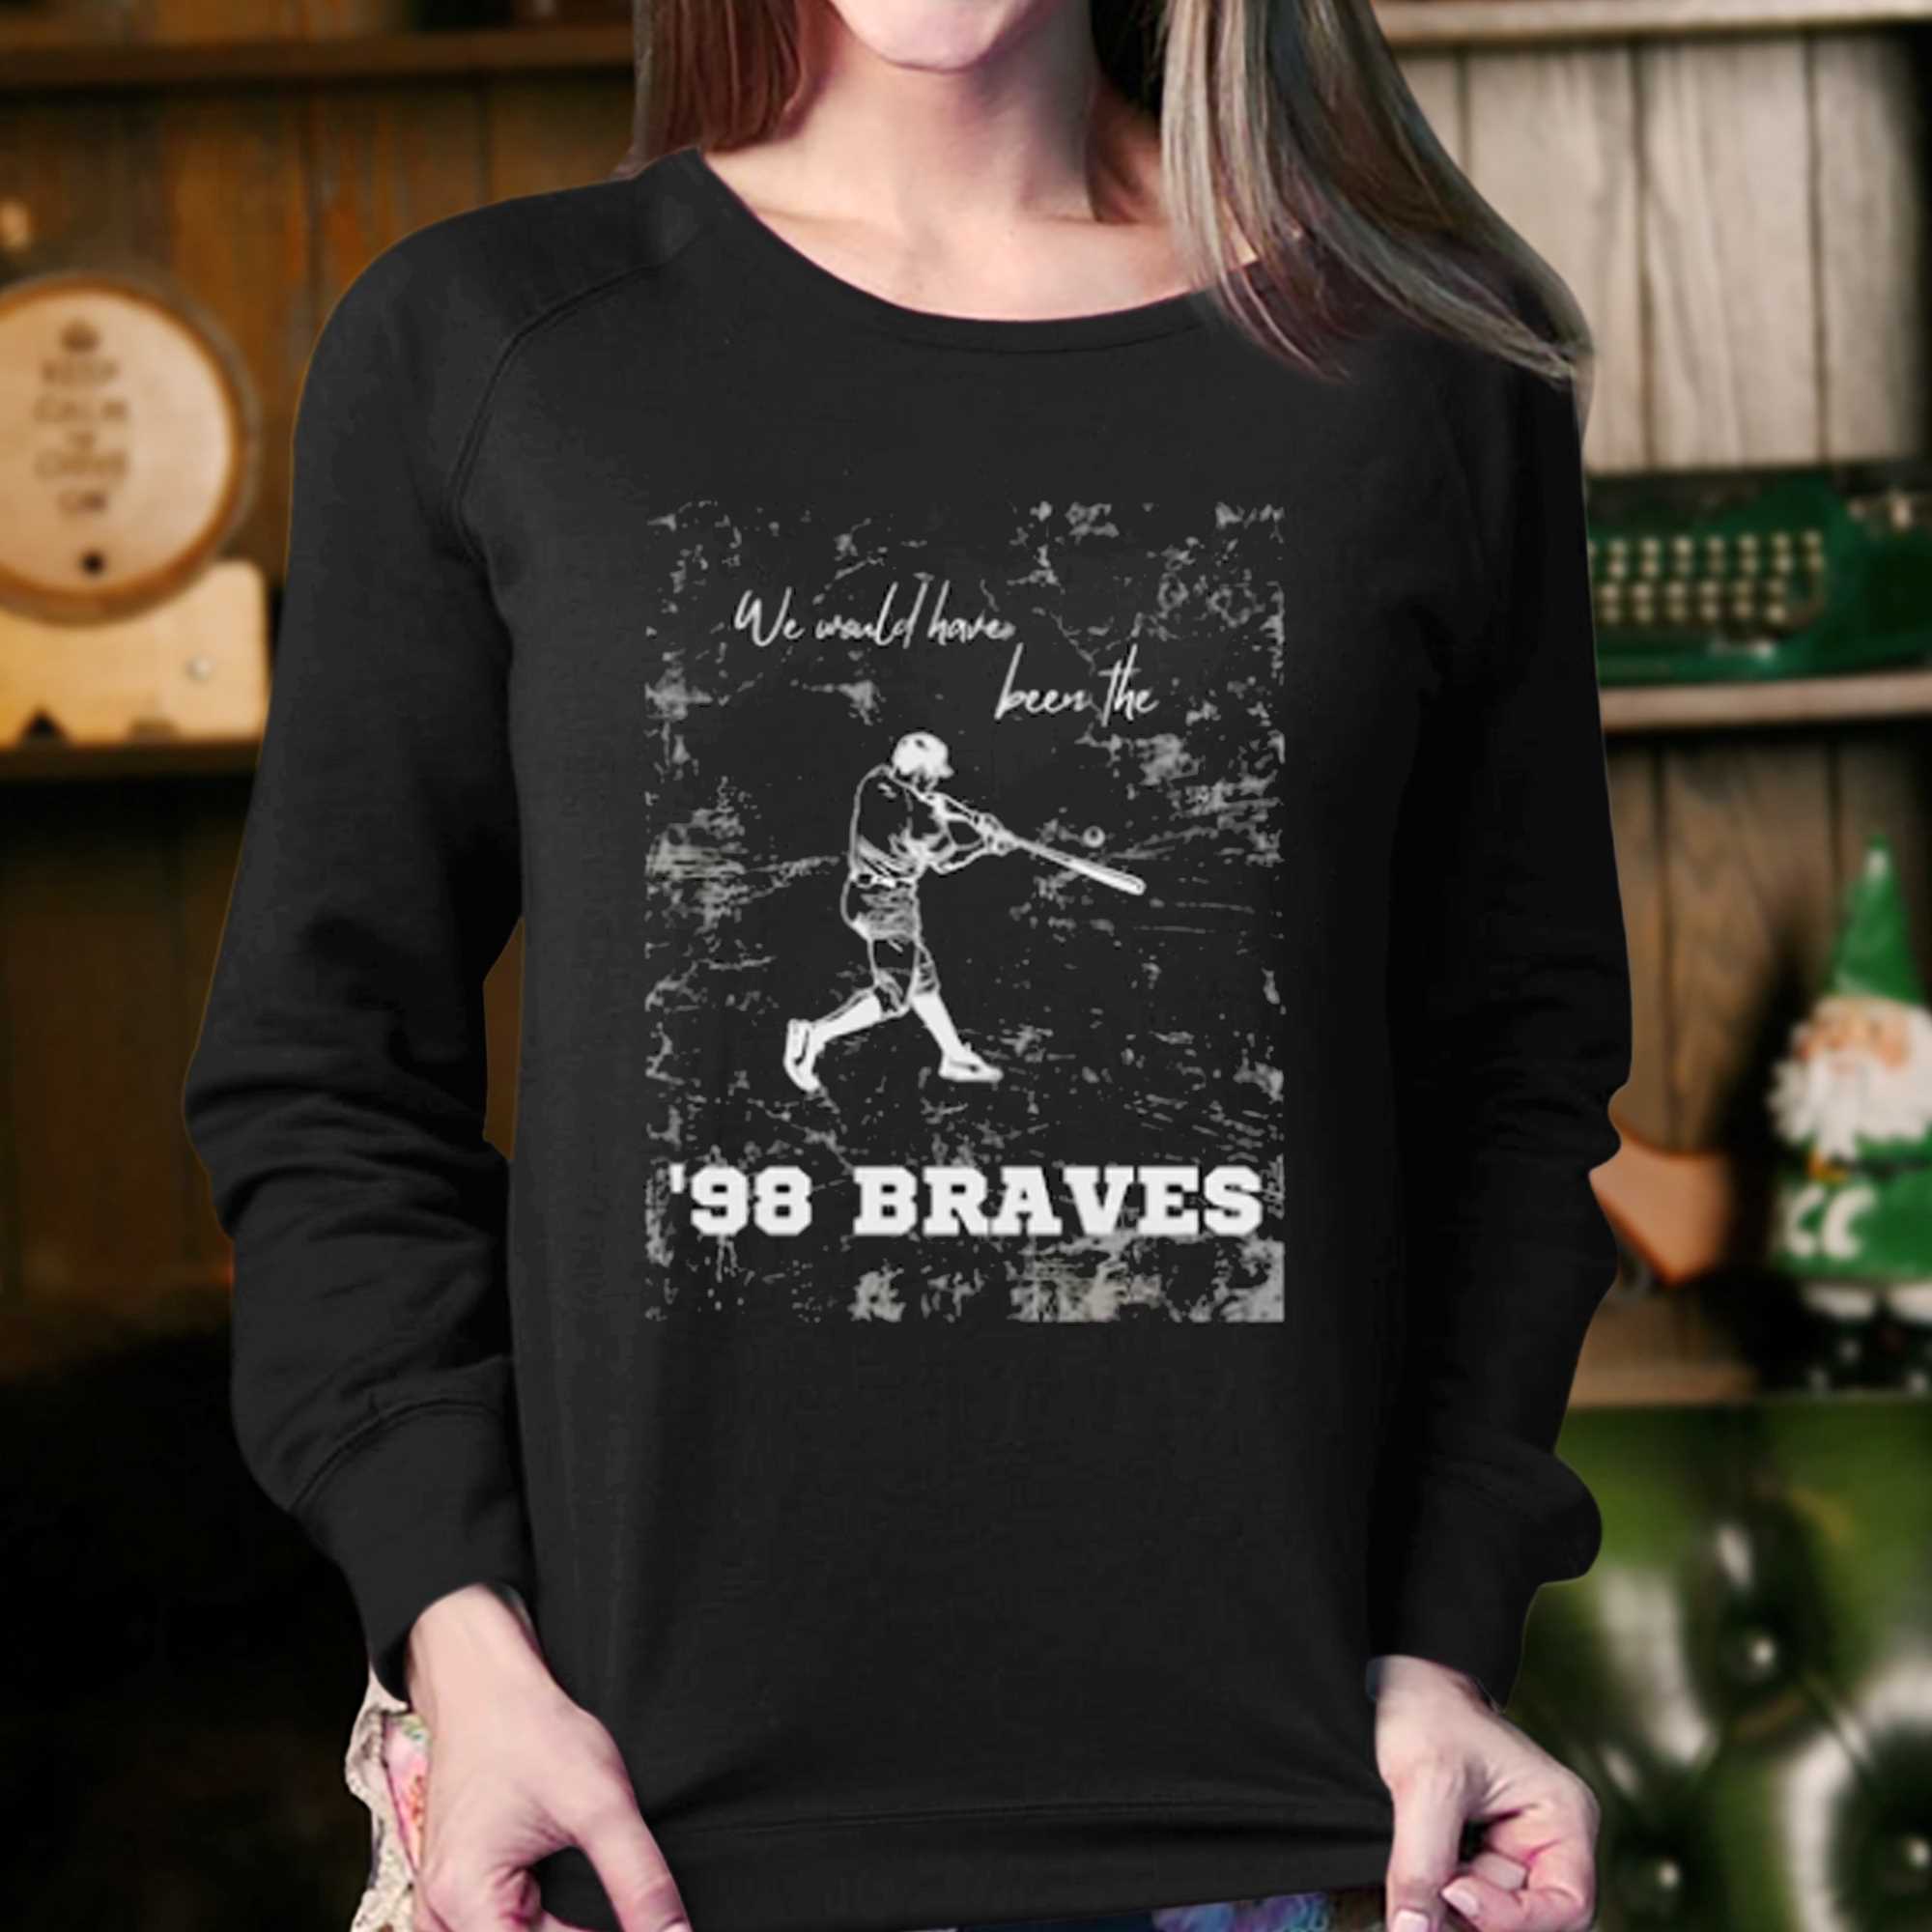 Infant Baby Wallen Braves 98 Shirt Country Music Shirt 